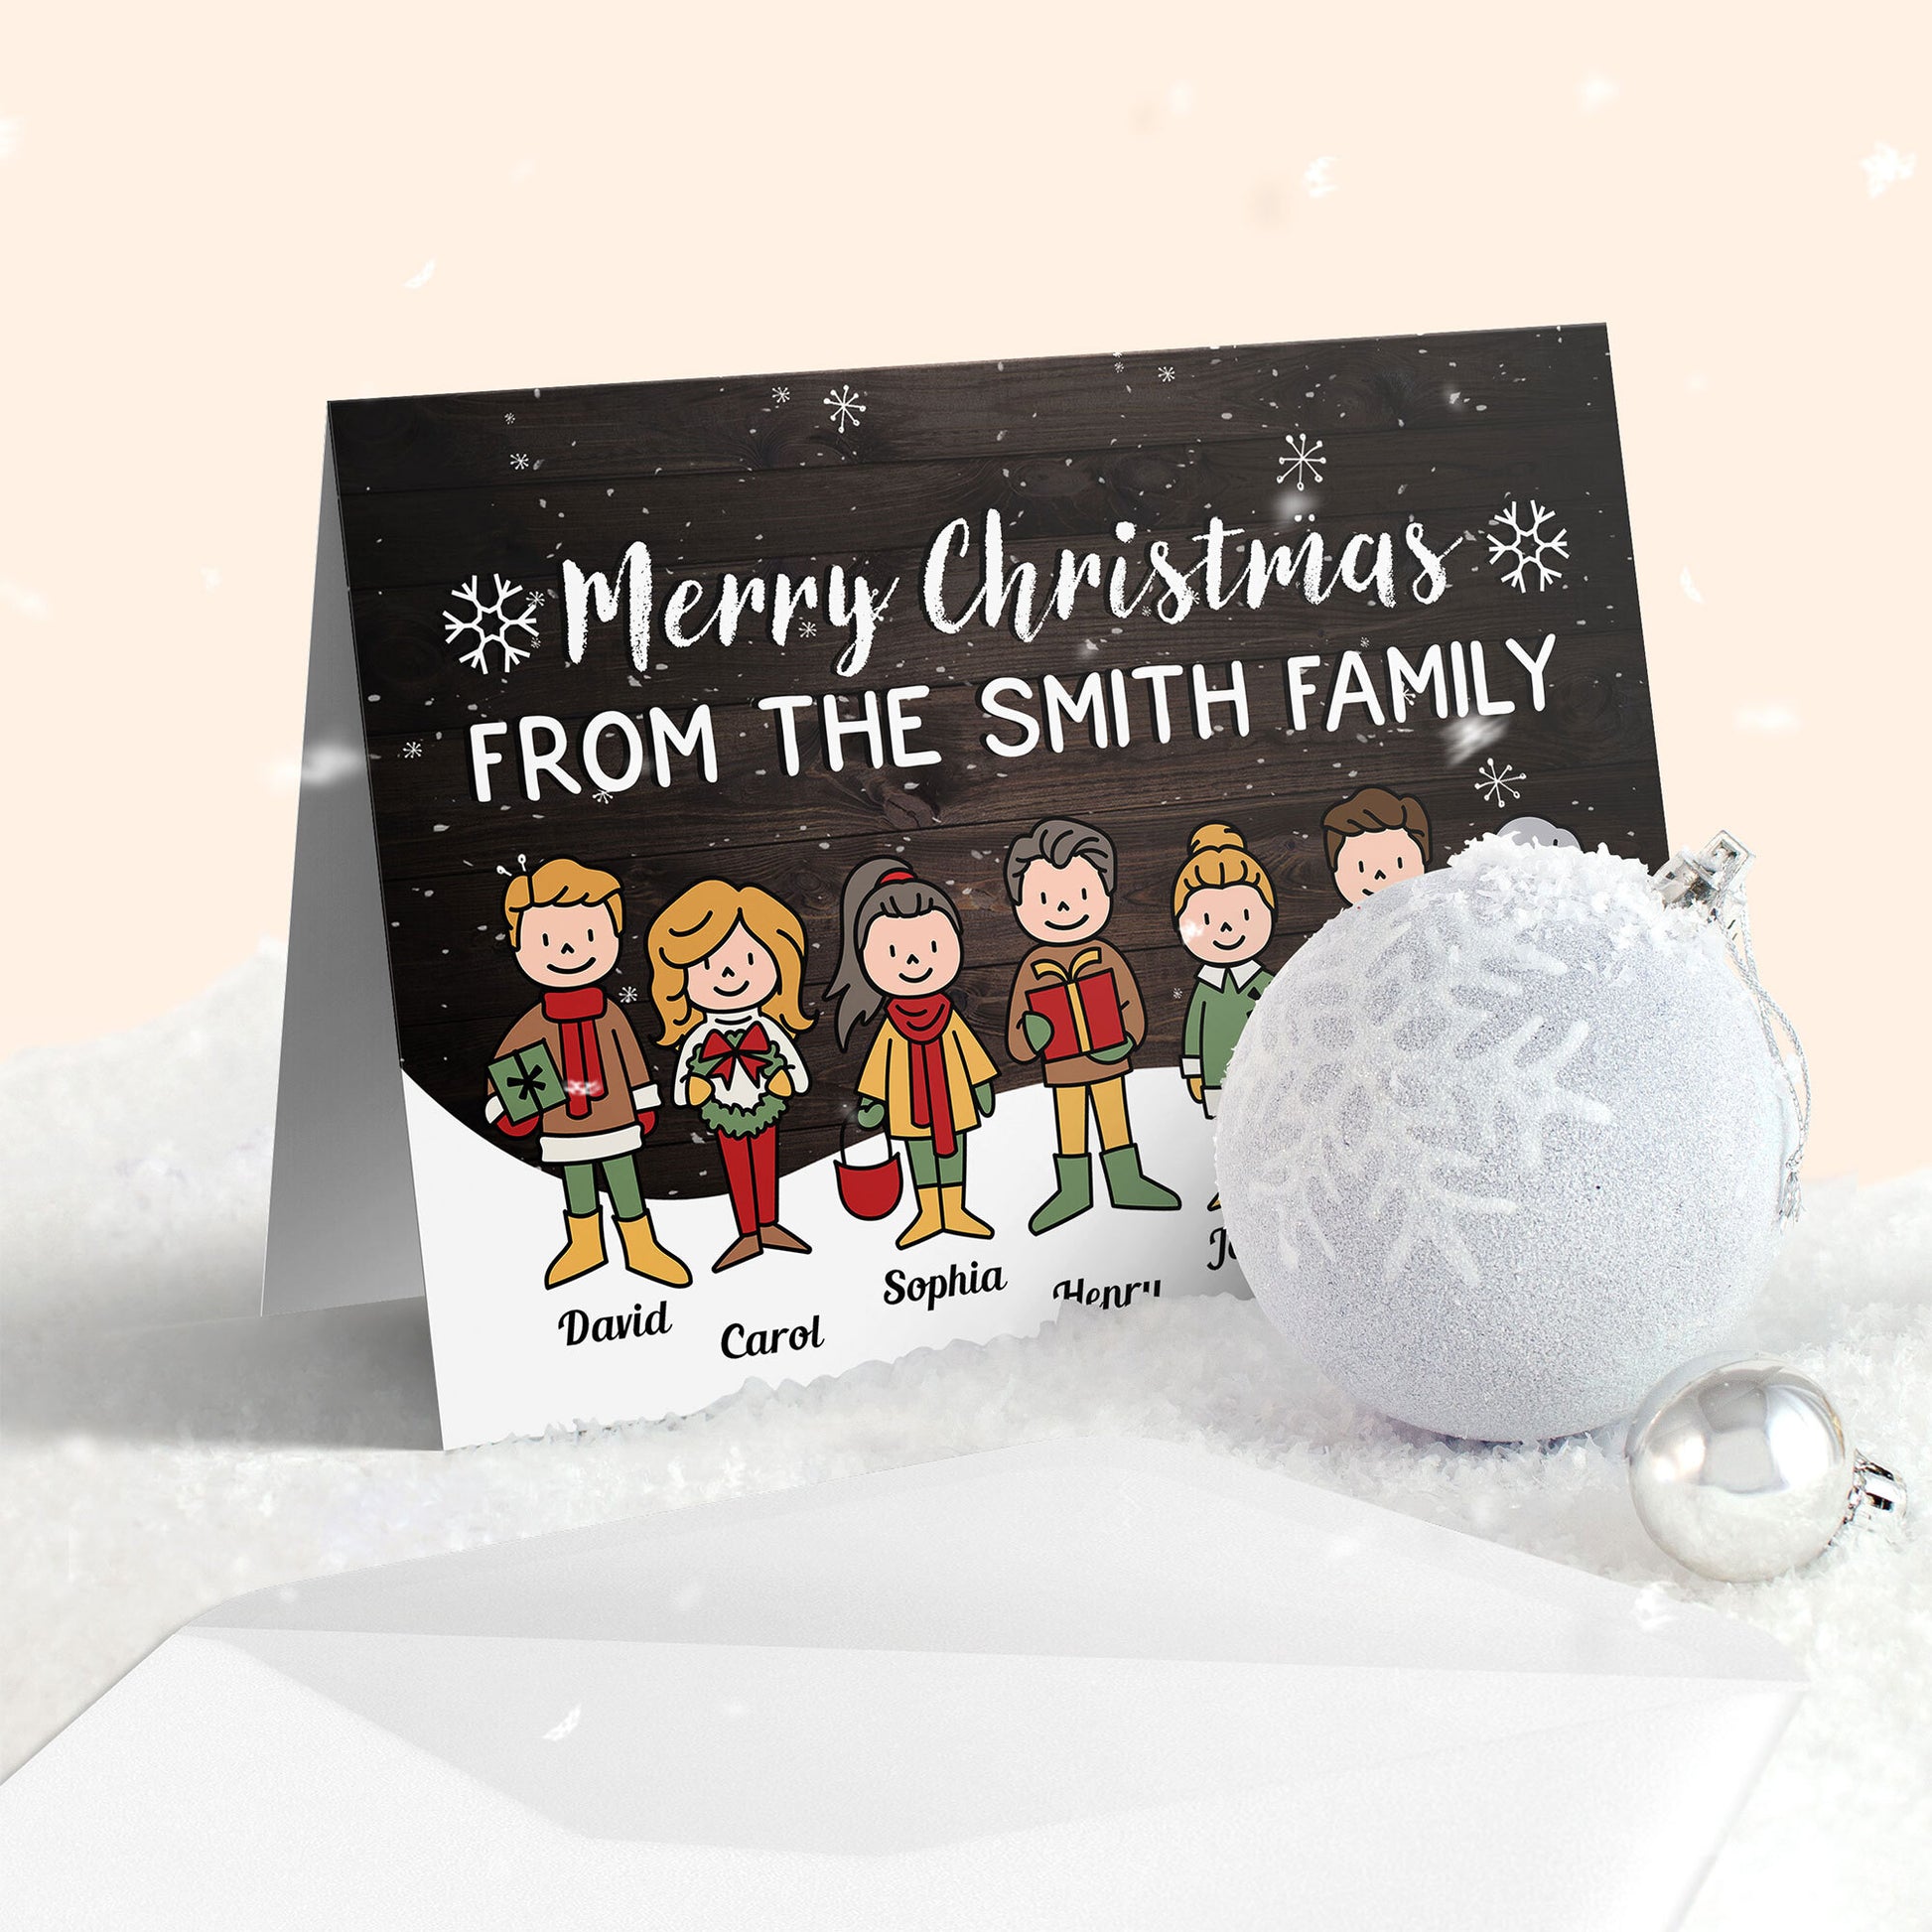 The Joy Of Christmas Is Family - Personalized Folded Card - Christmas Gift For Family Members